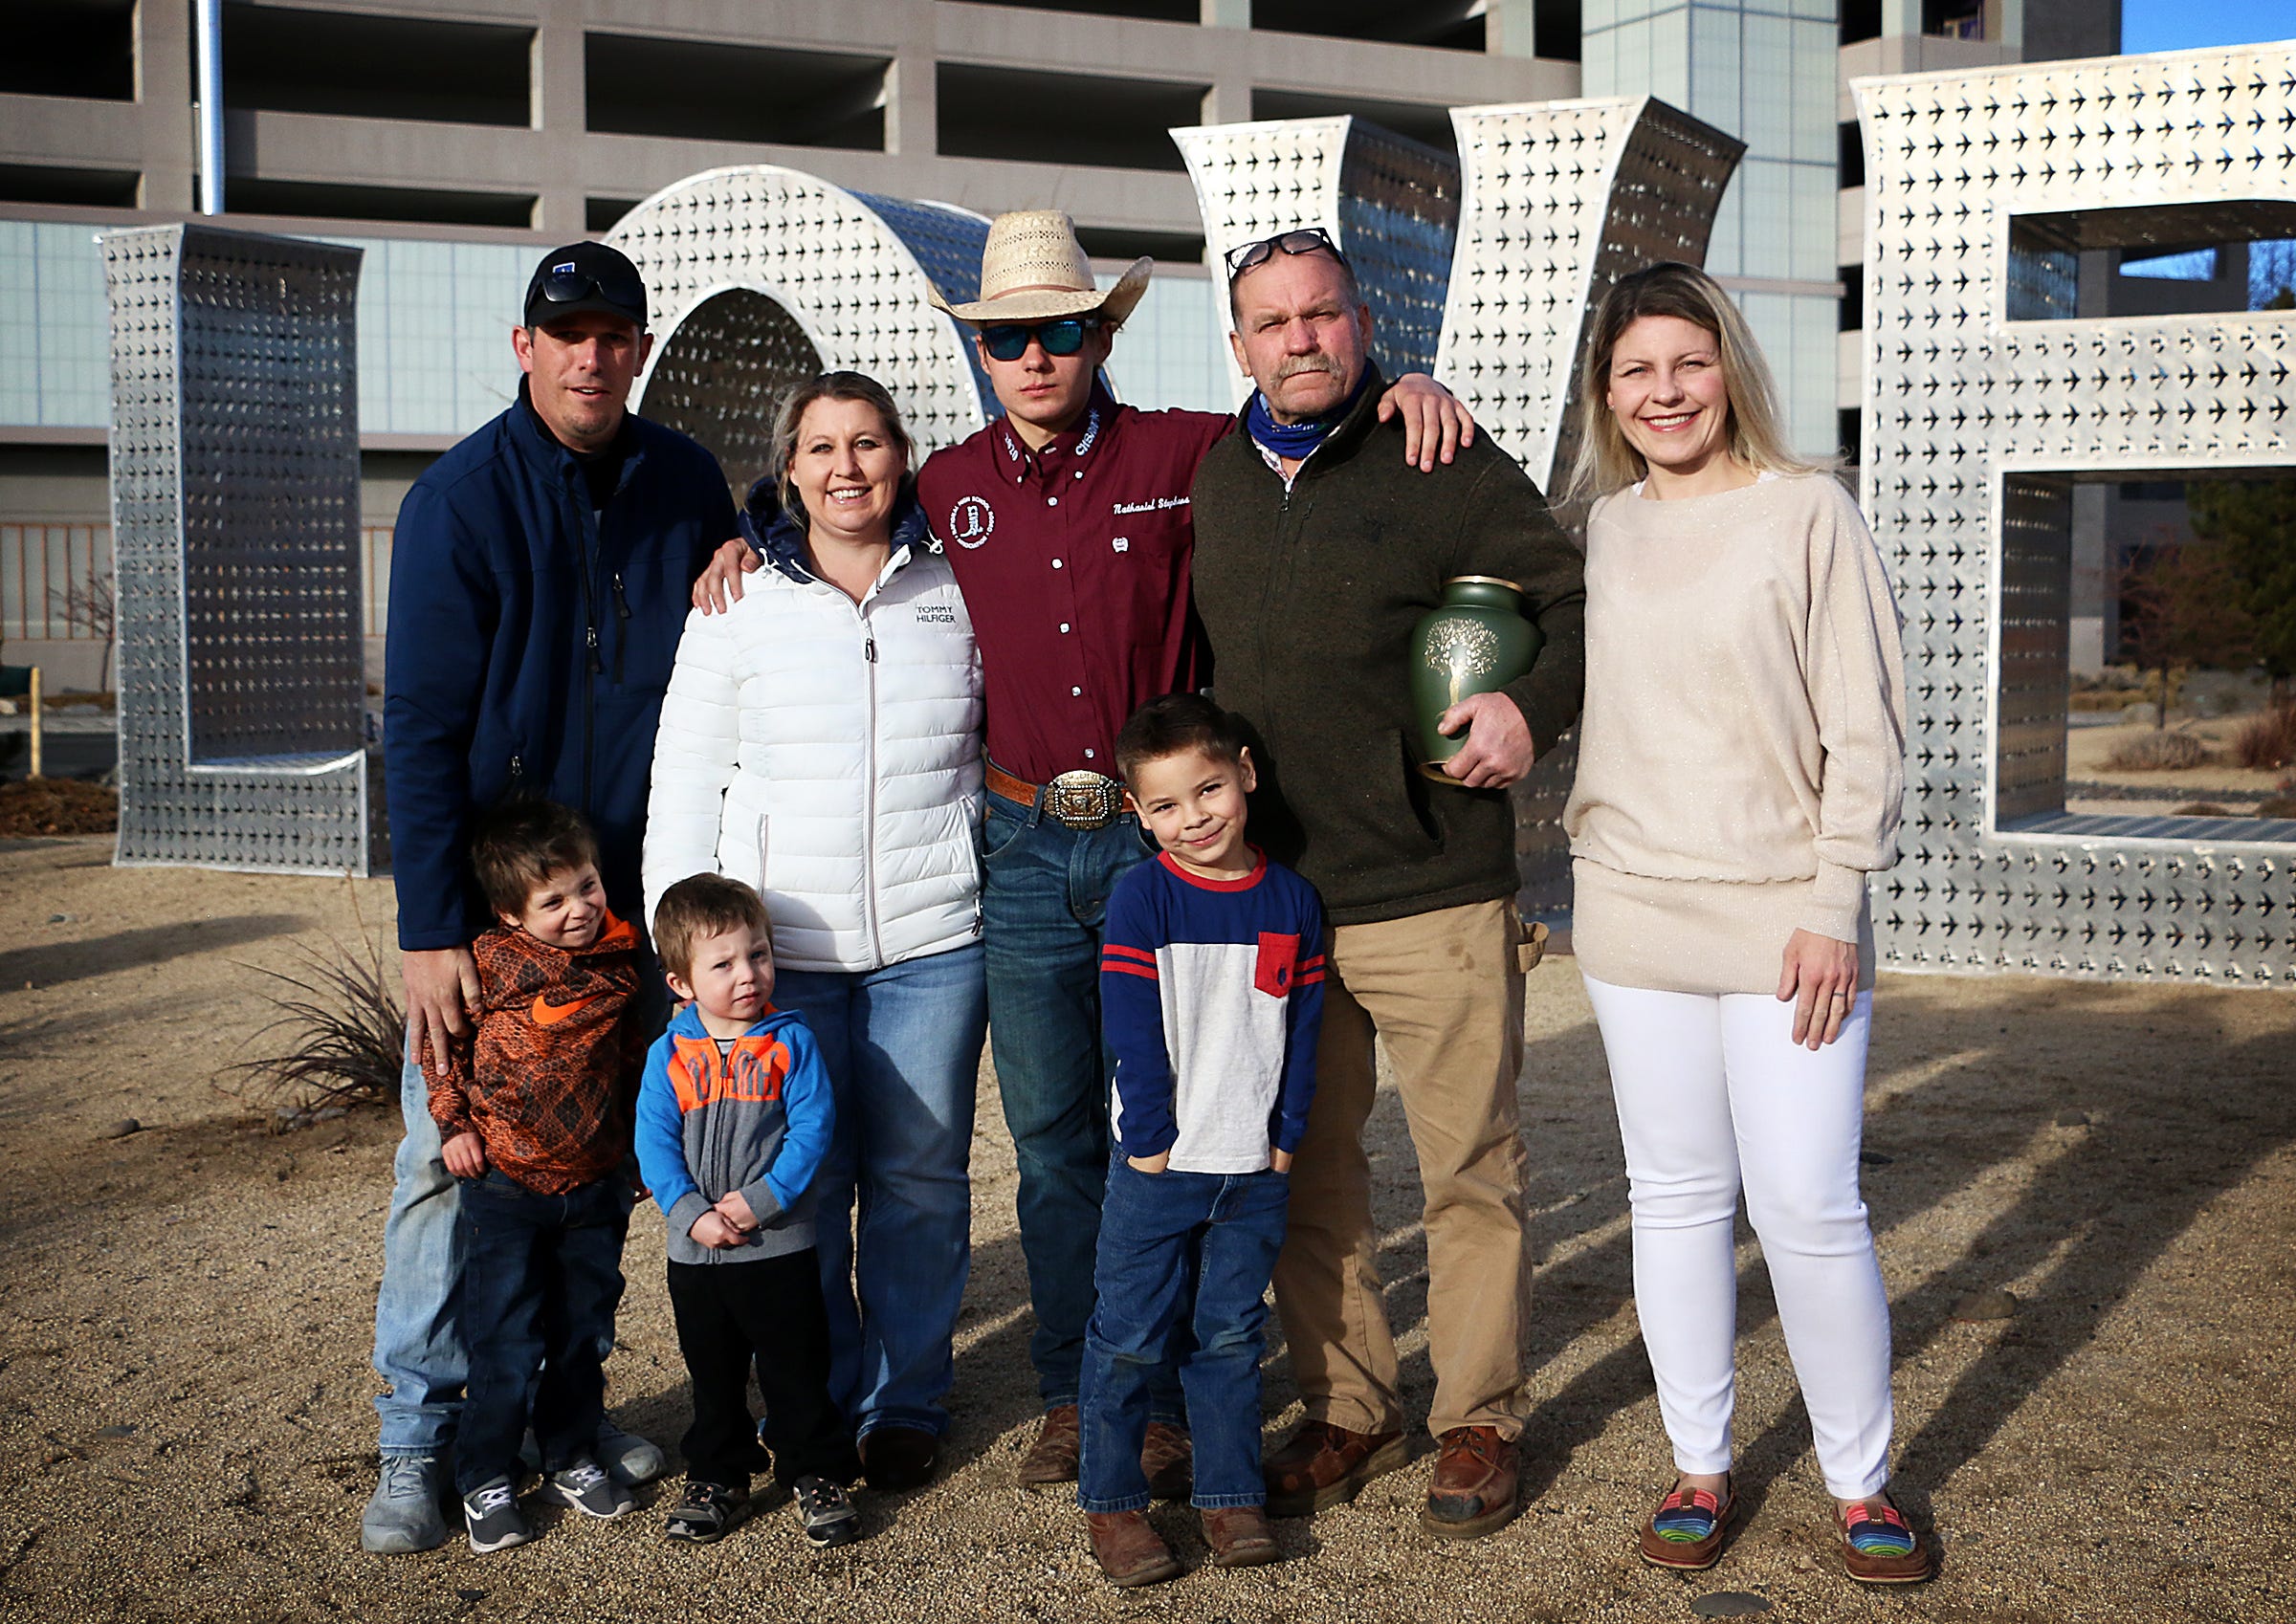 The family of Judy Dover, who died on Christmas Eve, stand with her ashes in front of the Love sculpture at Renown Regional Medical Center in Reno on Feb. 13, 2021. Back row from left: Adam Wagoner, Charity Wagoner, Nathanial Stephens, Lou Dover and Christina Barnes. Front from left: Nicolas Wagoner, Mason Wagoner and Blake Barnes.